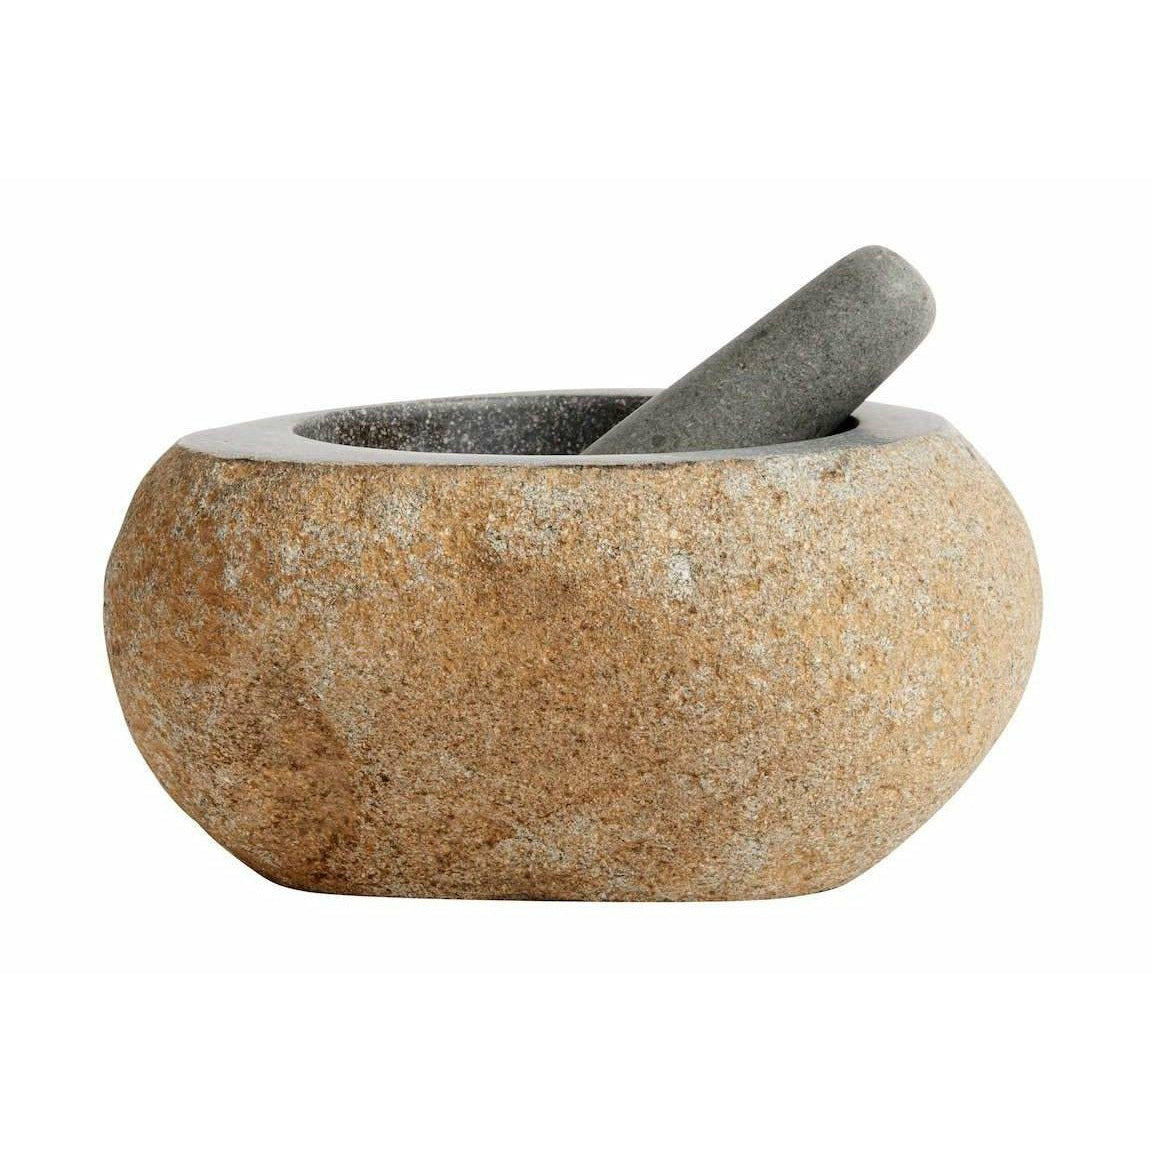 Muubs Valley Morter Riverstone, 18cm